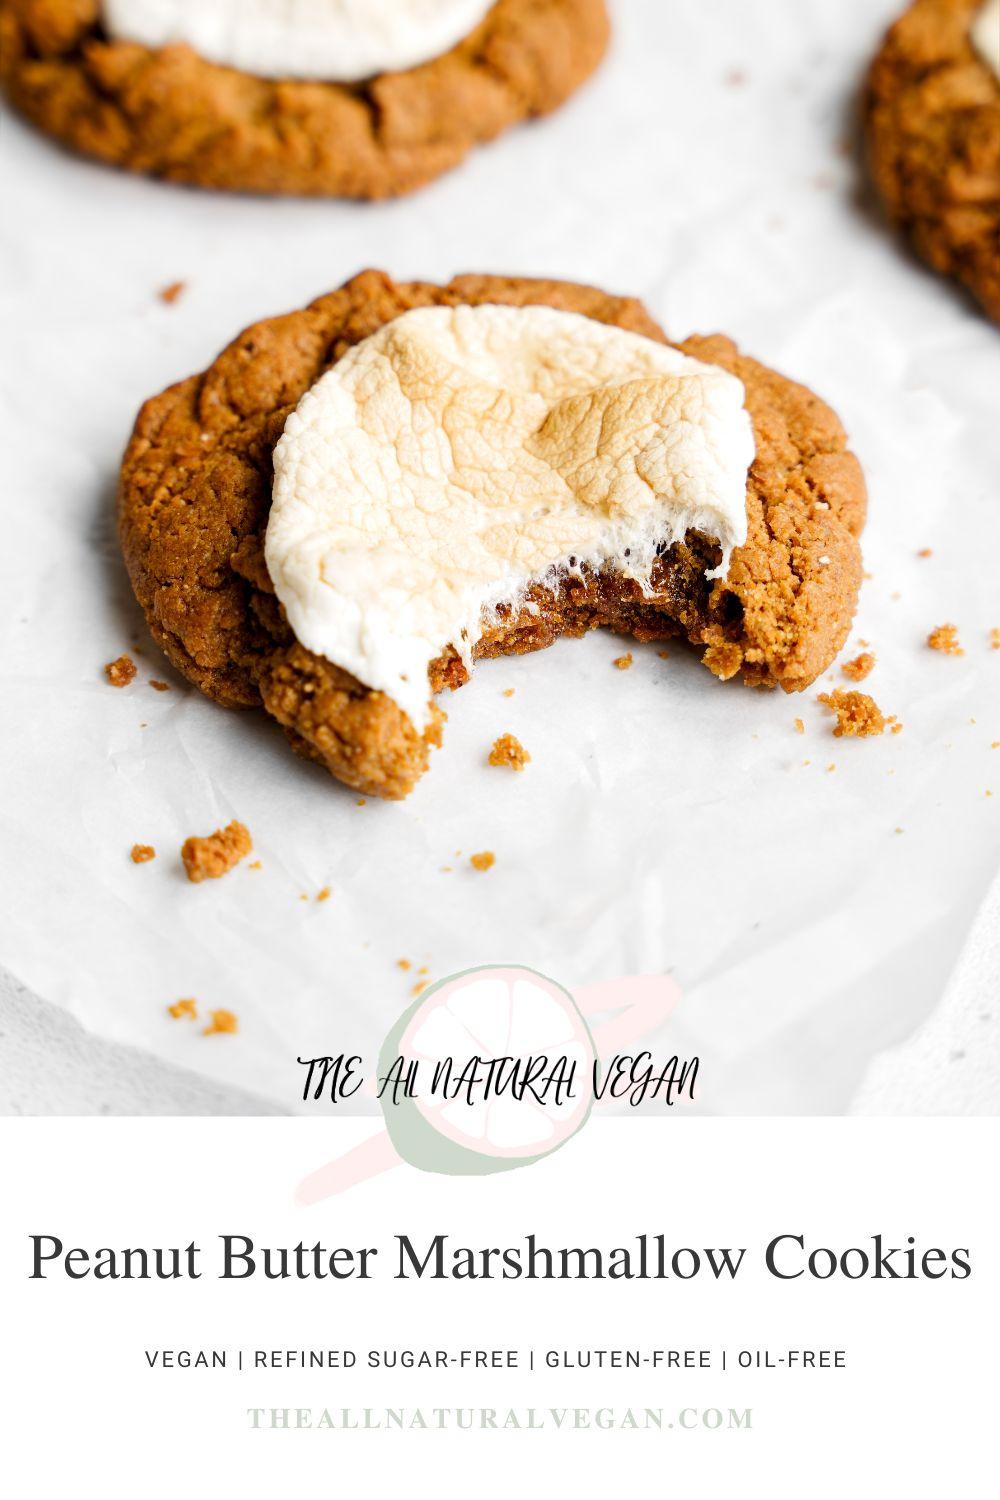 recipe card stating this recipe is vegan, gluten-free, refined sugar-free, and oil-free